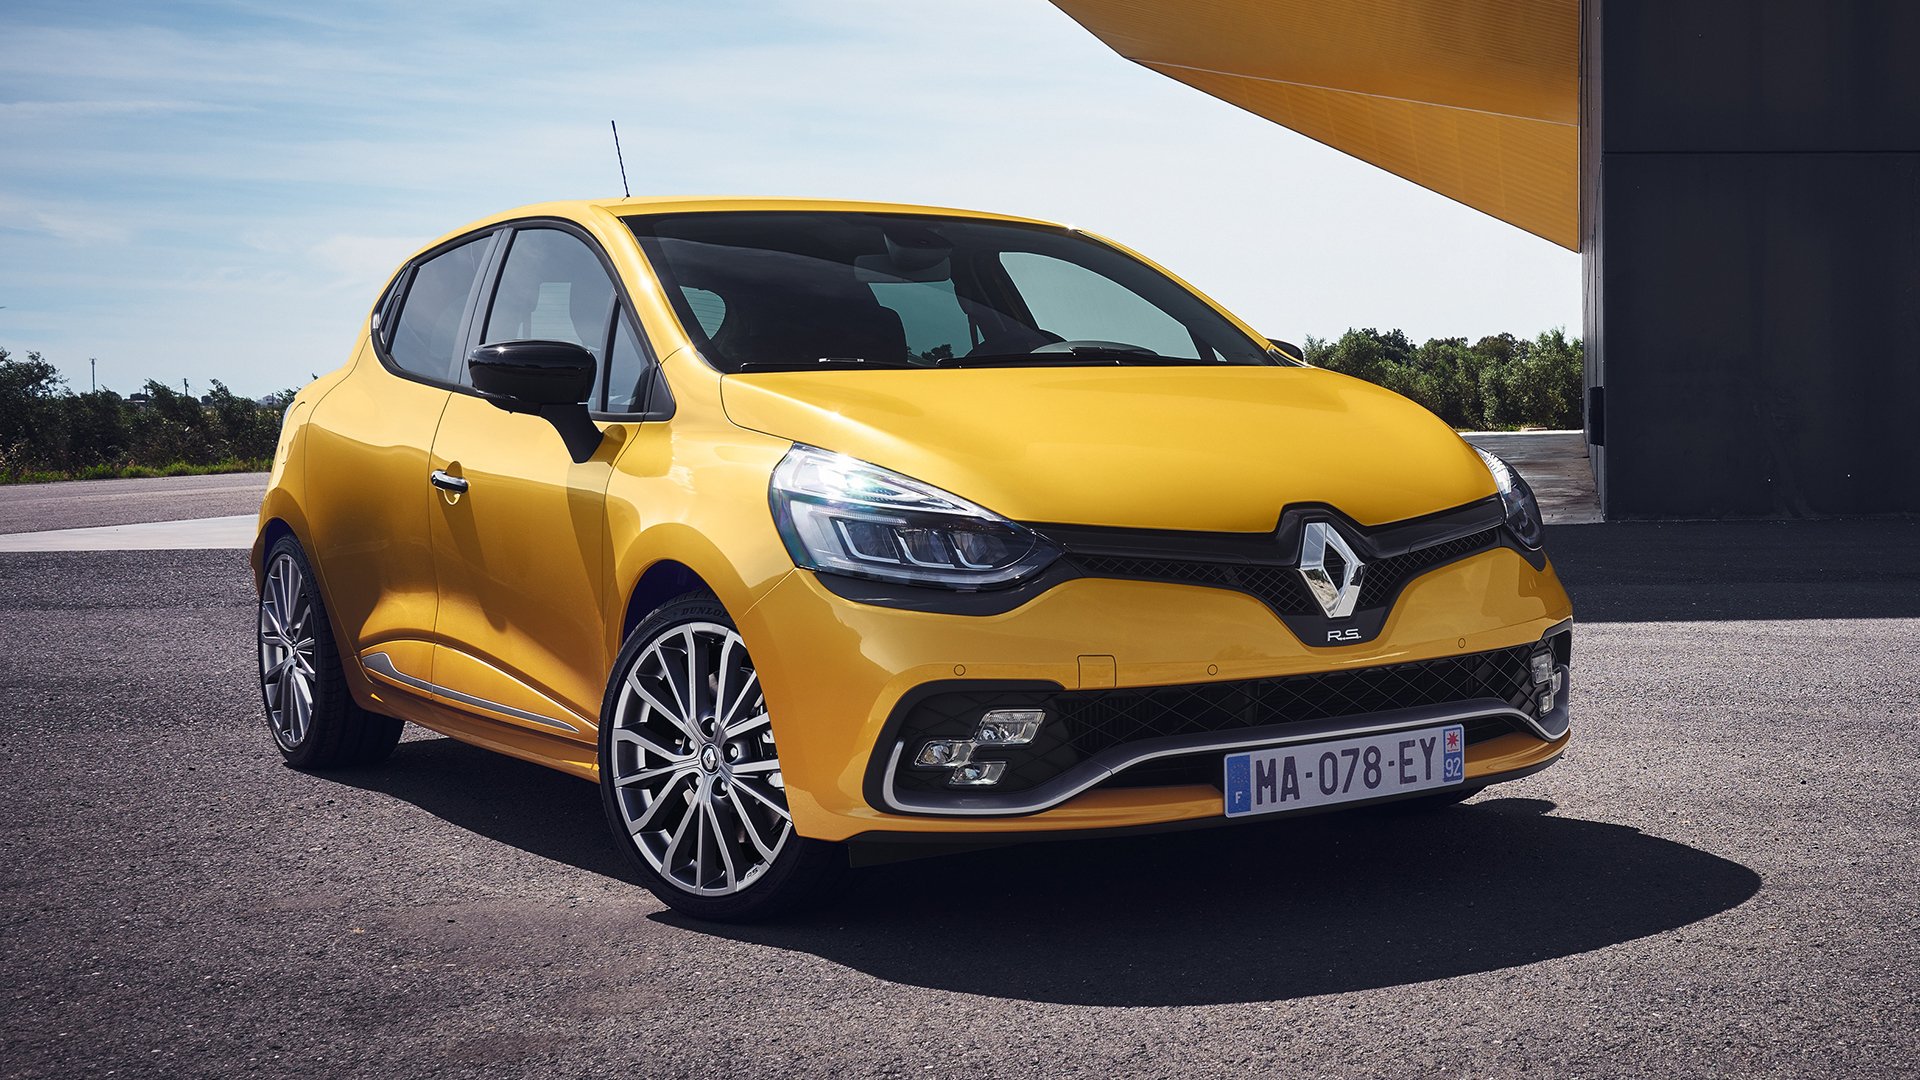 New Renault Clio RS Render Is The Hot Hatch We're Waiting For